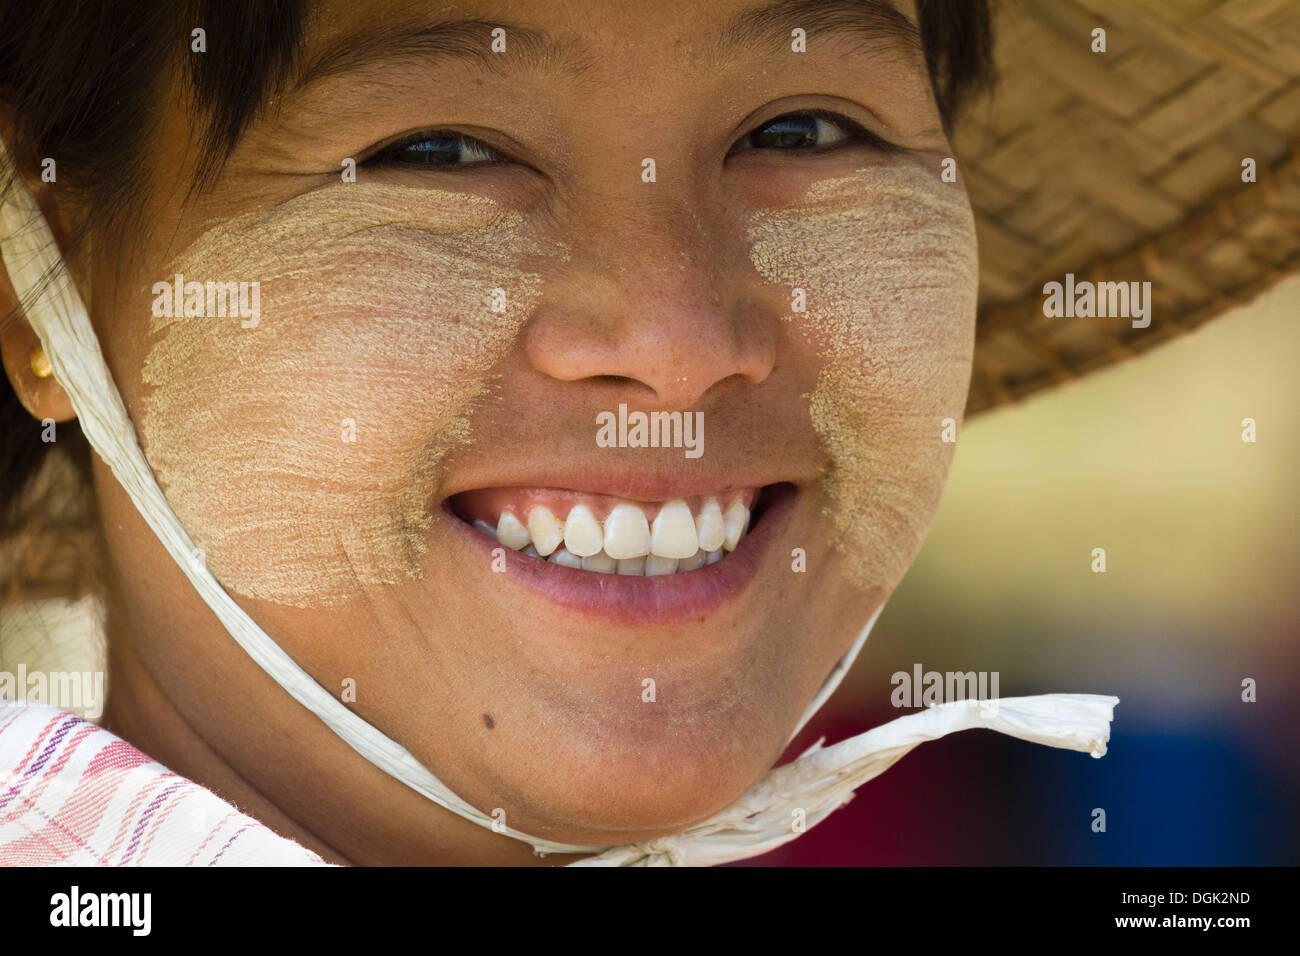 A smiling girl with Thanaka makeup and wearing conical straw hat in Mingun in Myanmar. Stock Photo